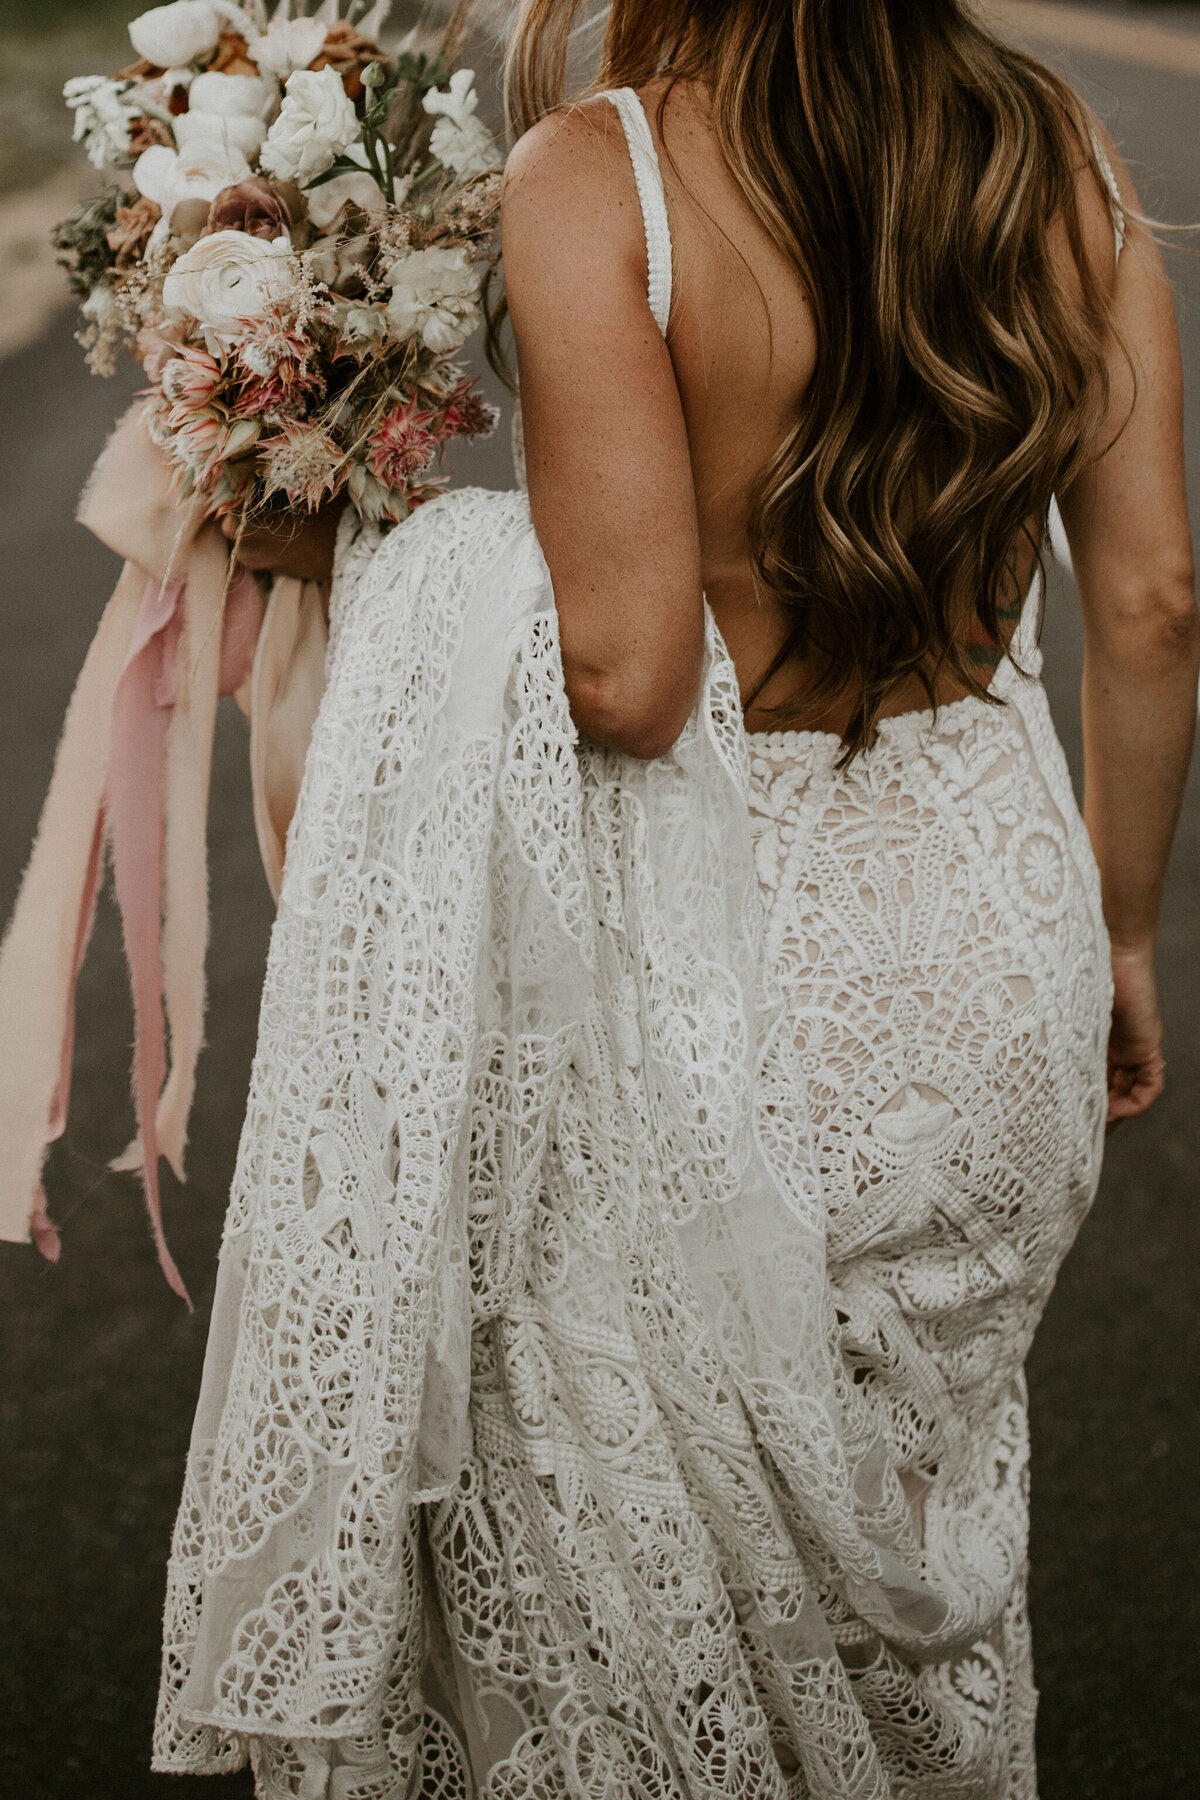 bride wearing a white wedding gown poses while holding her gown and a bouquet on one hand